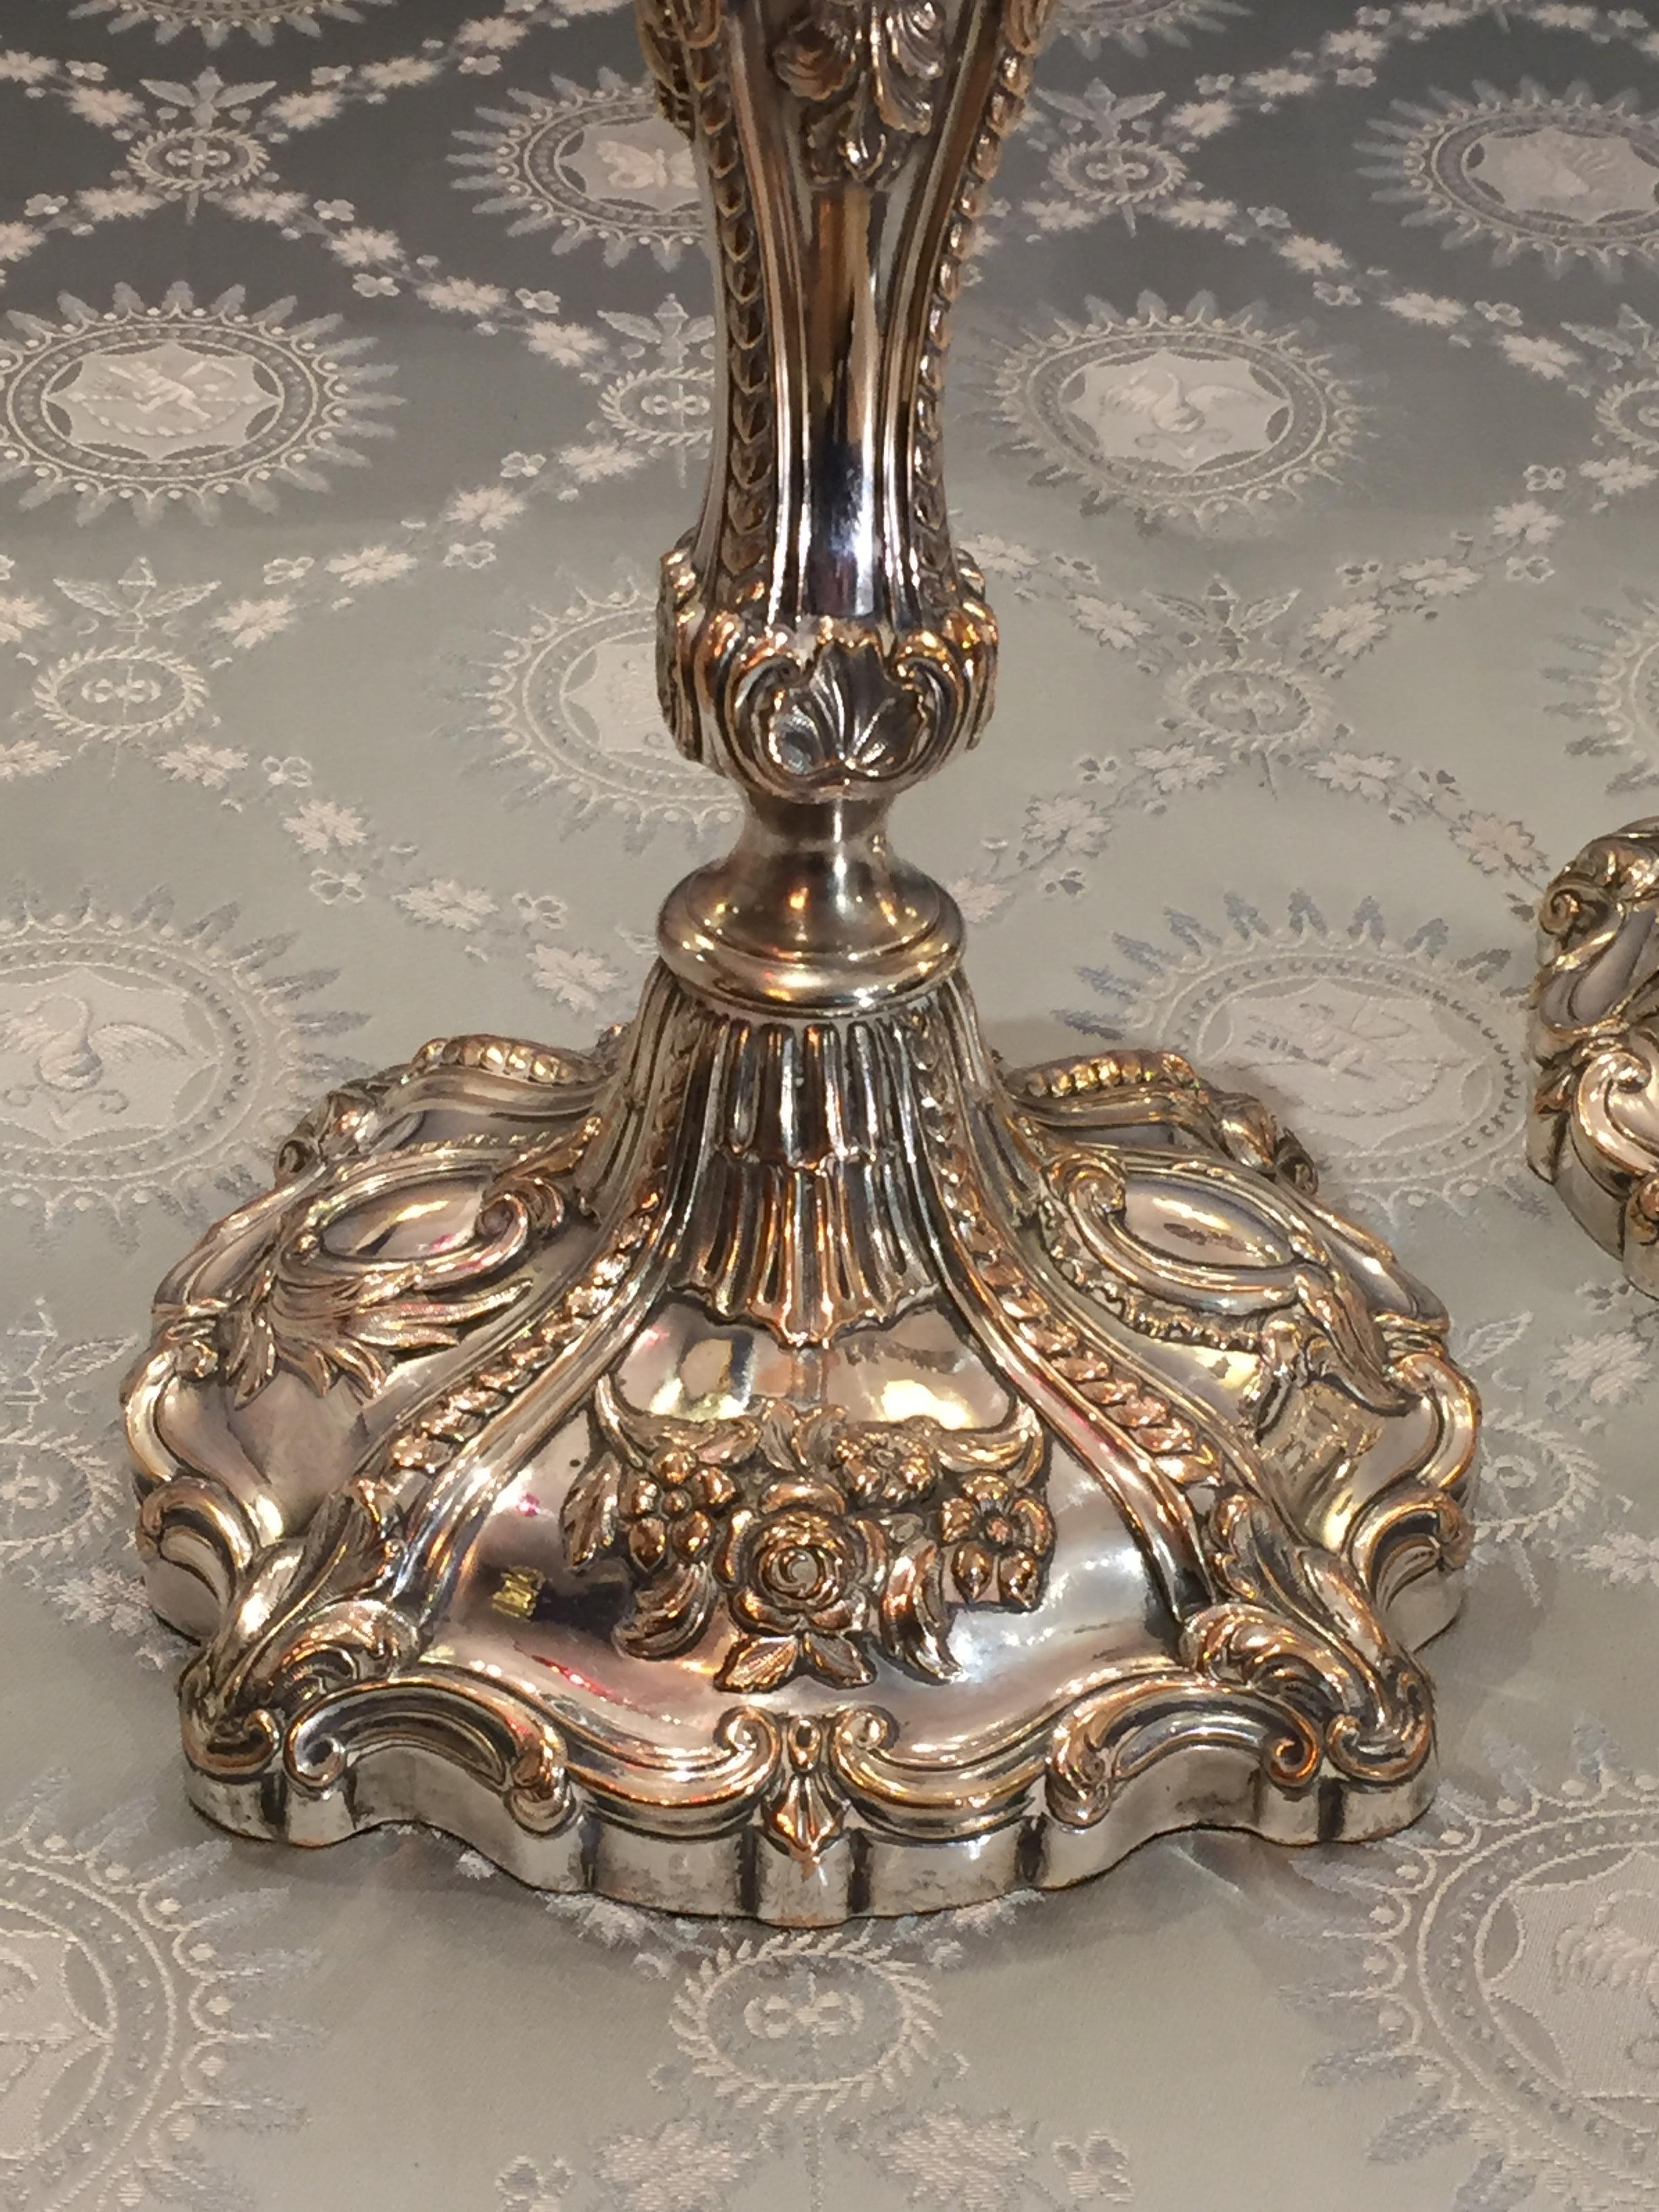 English Regency Period Rococo Revival Sheffield Plate Candlesticks by T and J Creswick For Sale